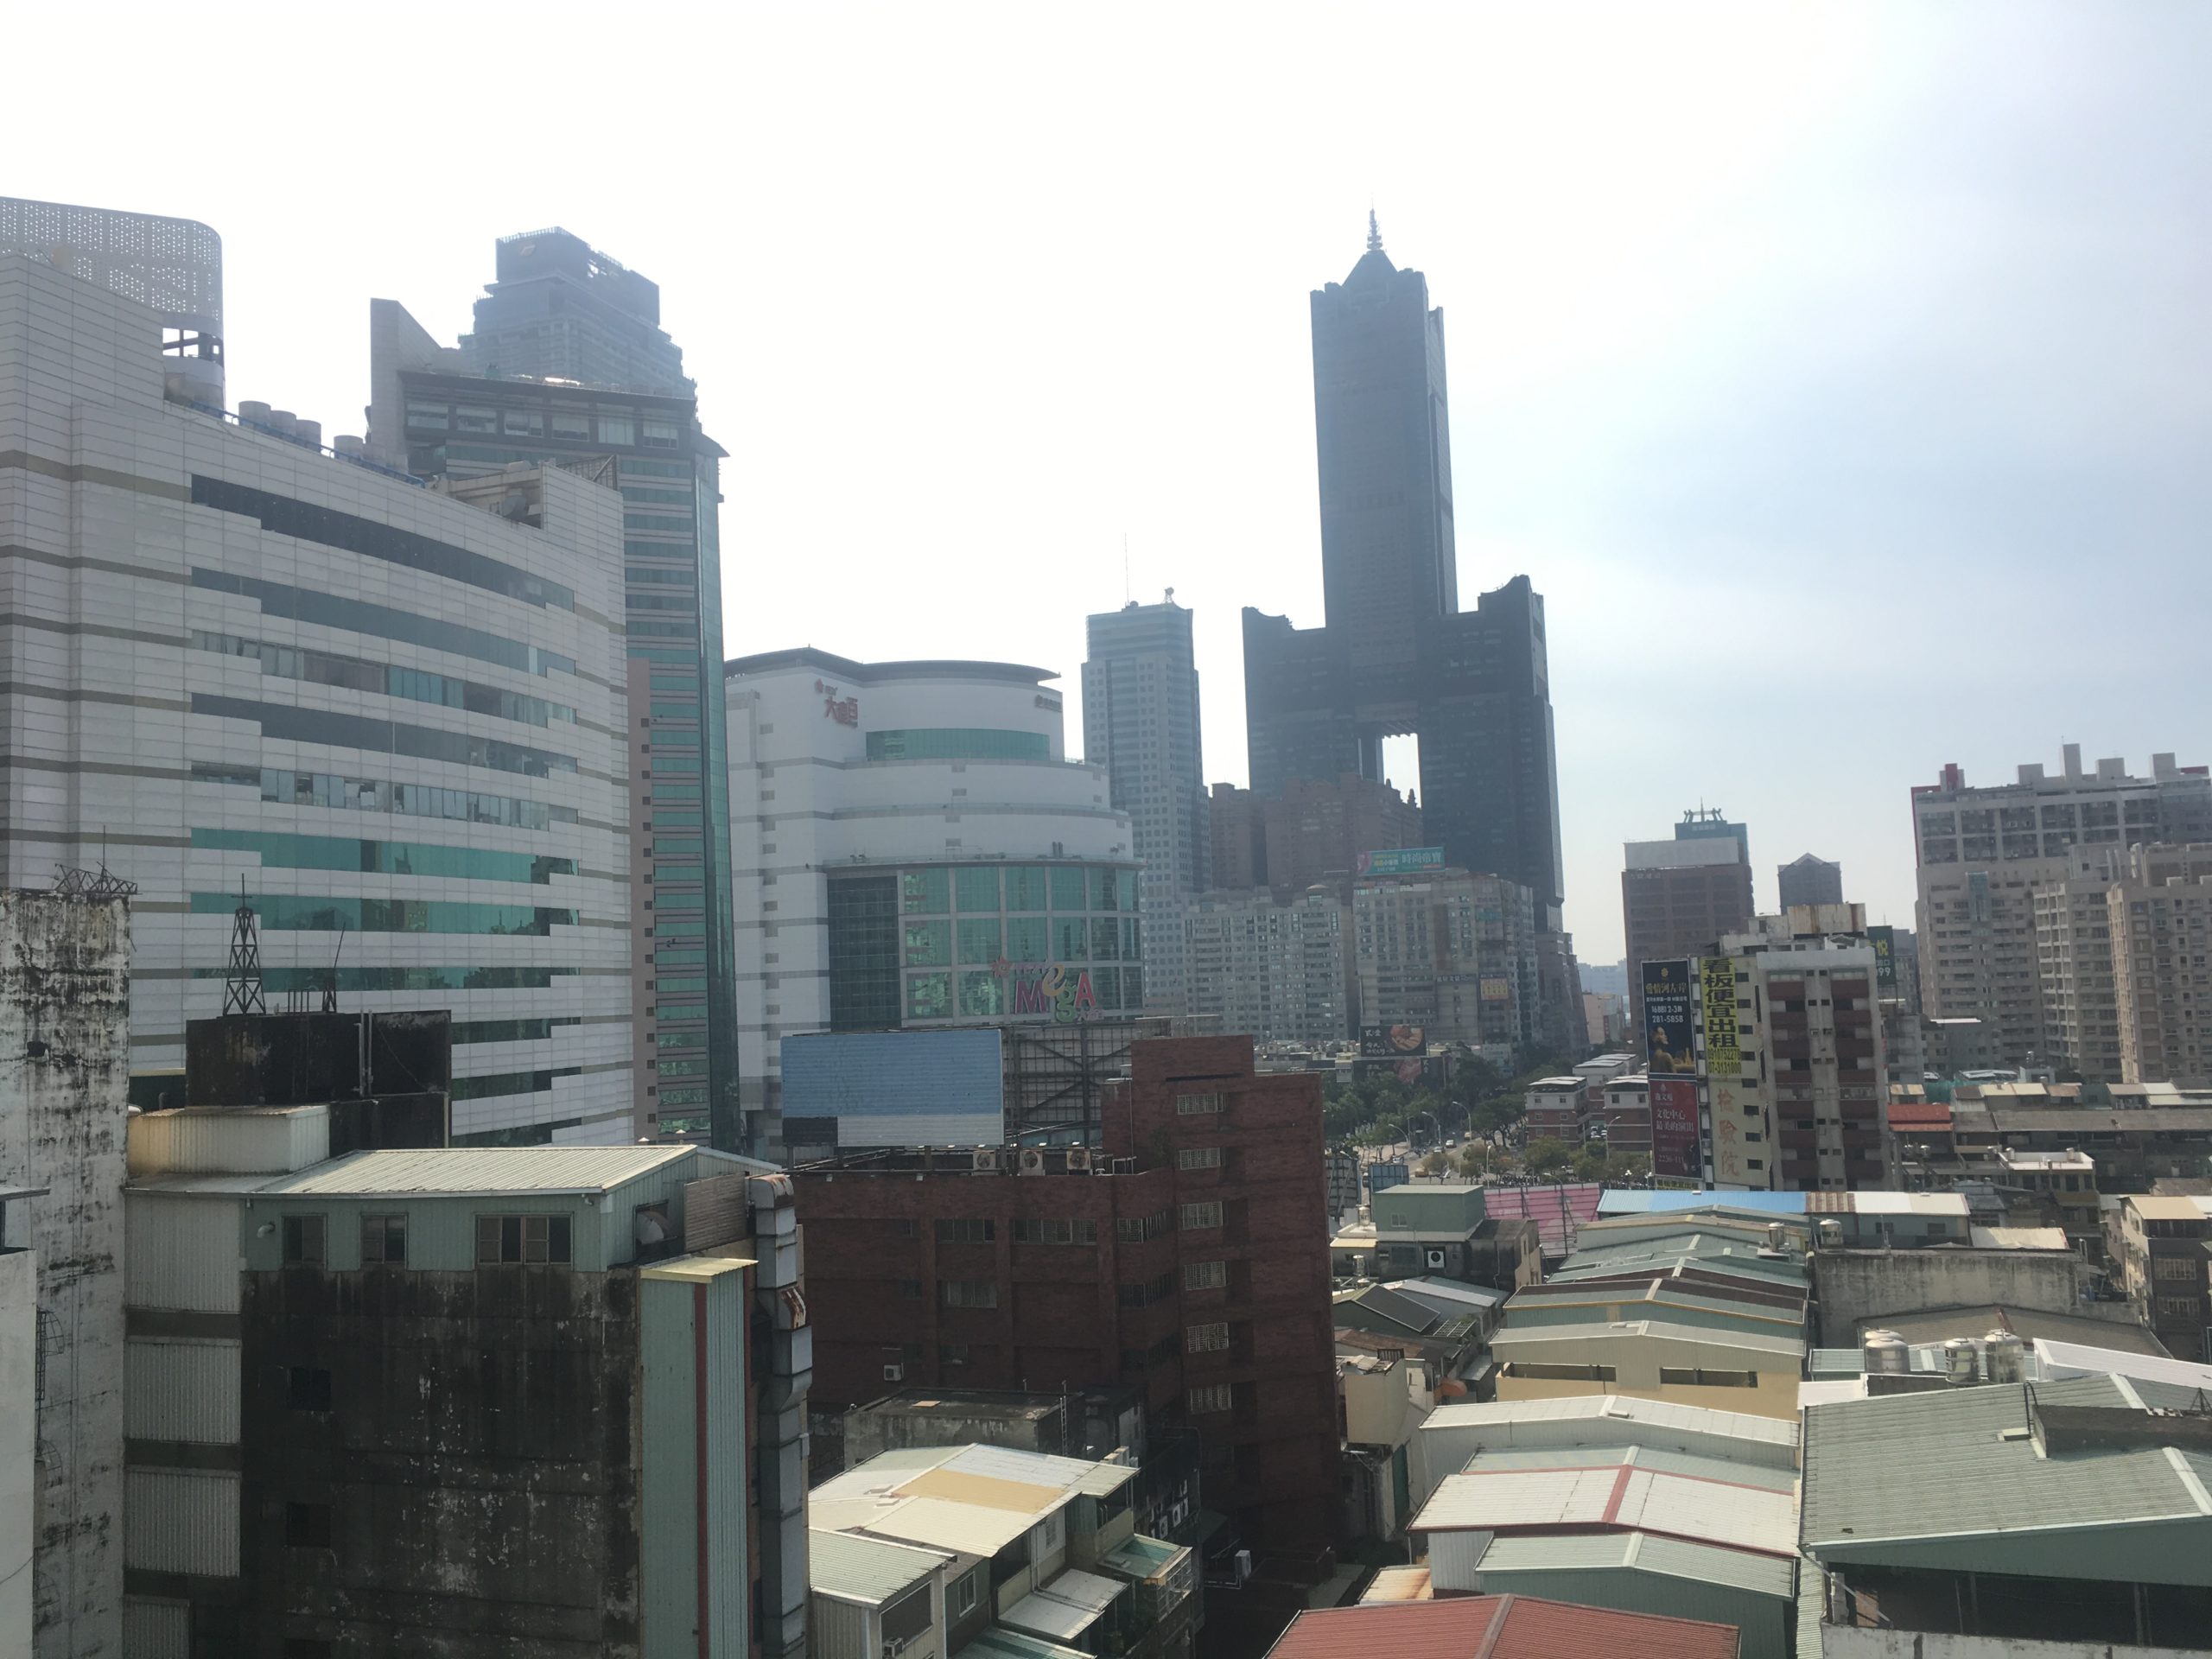 Day inner city Kaohsiung from balcony of R8Hotel